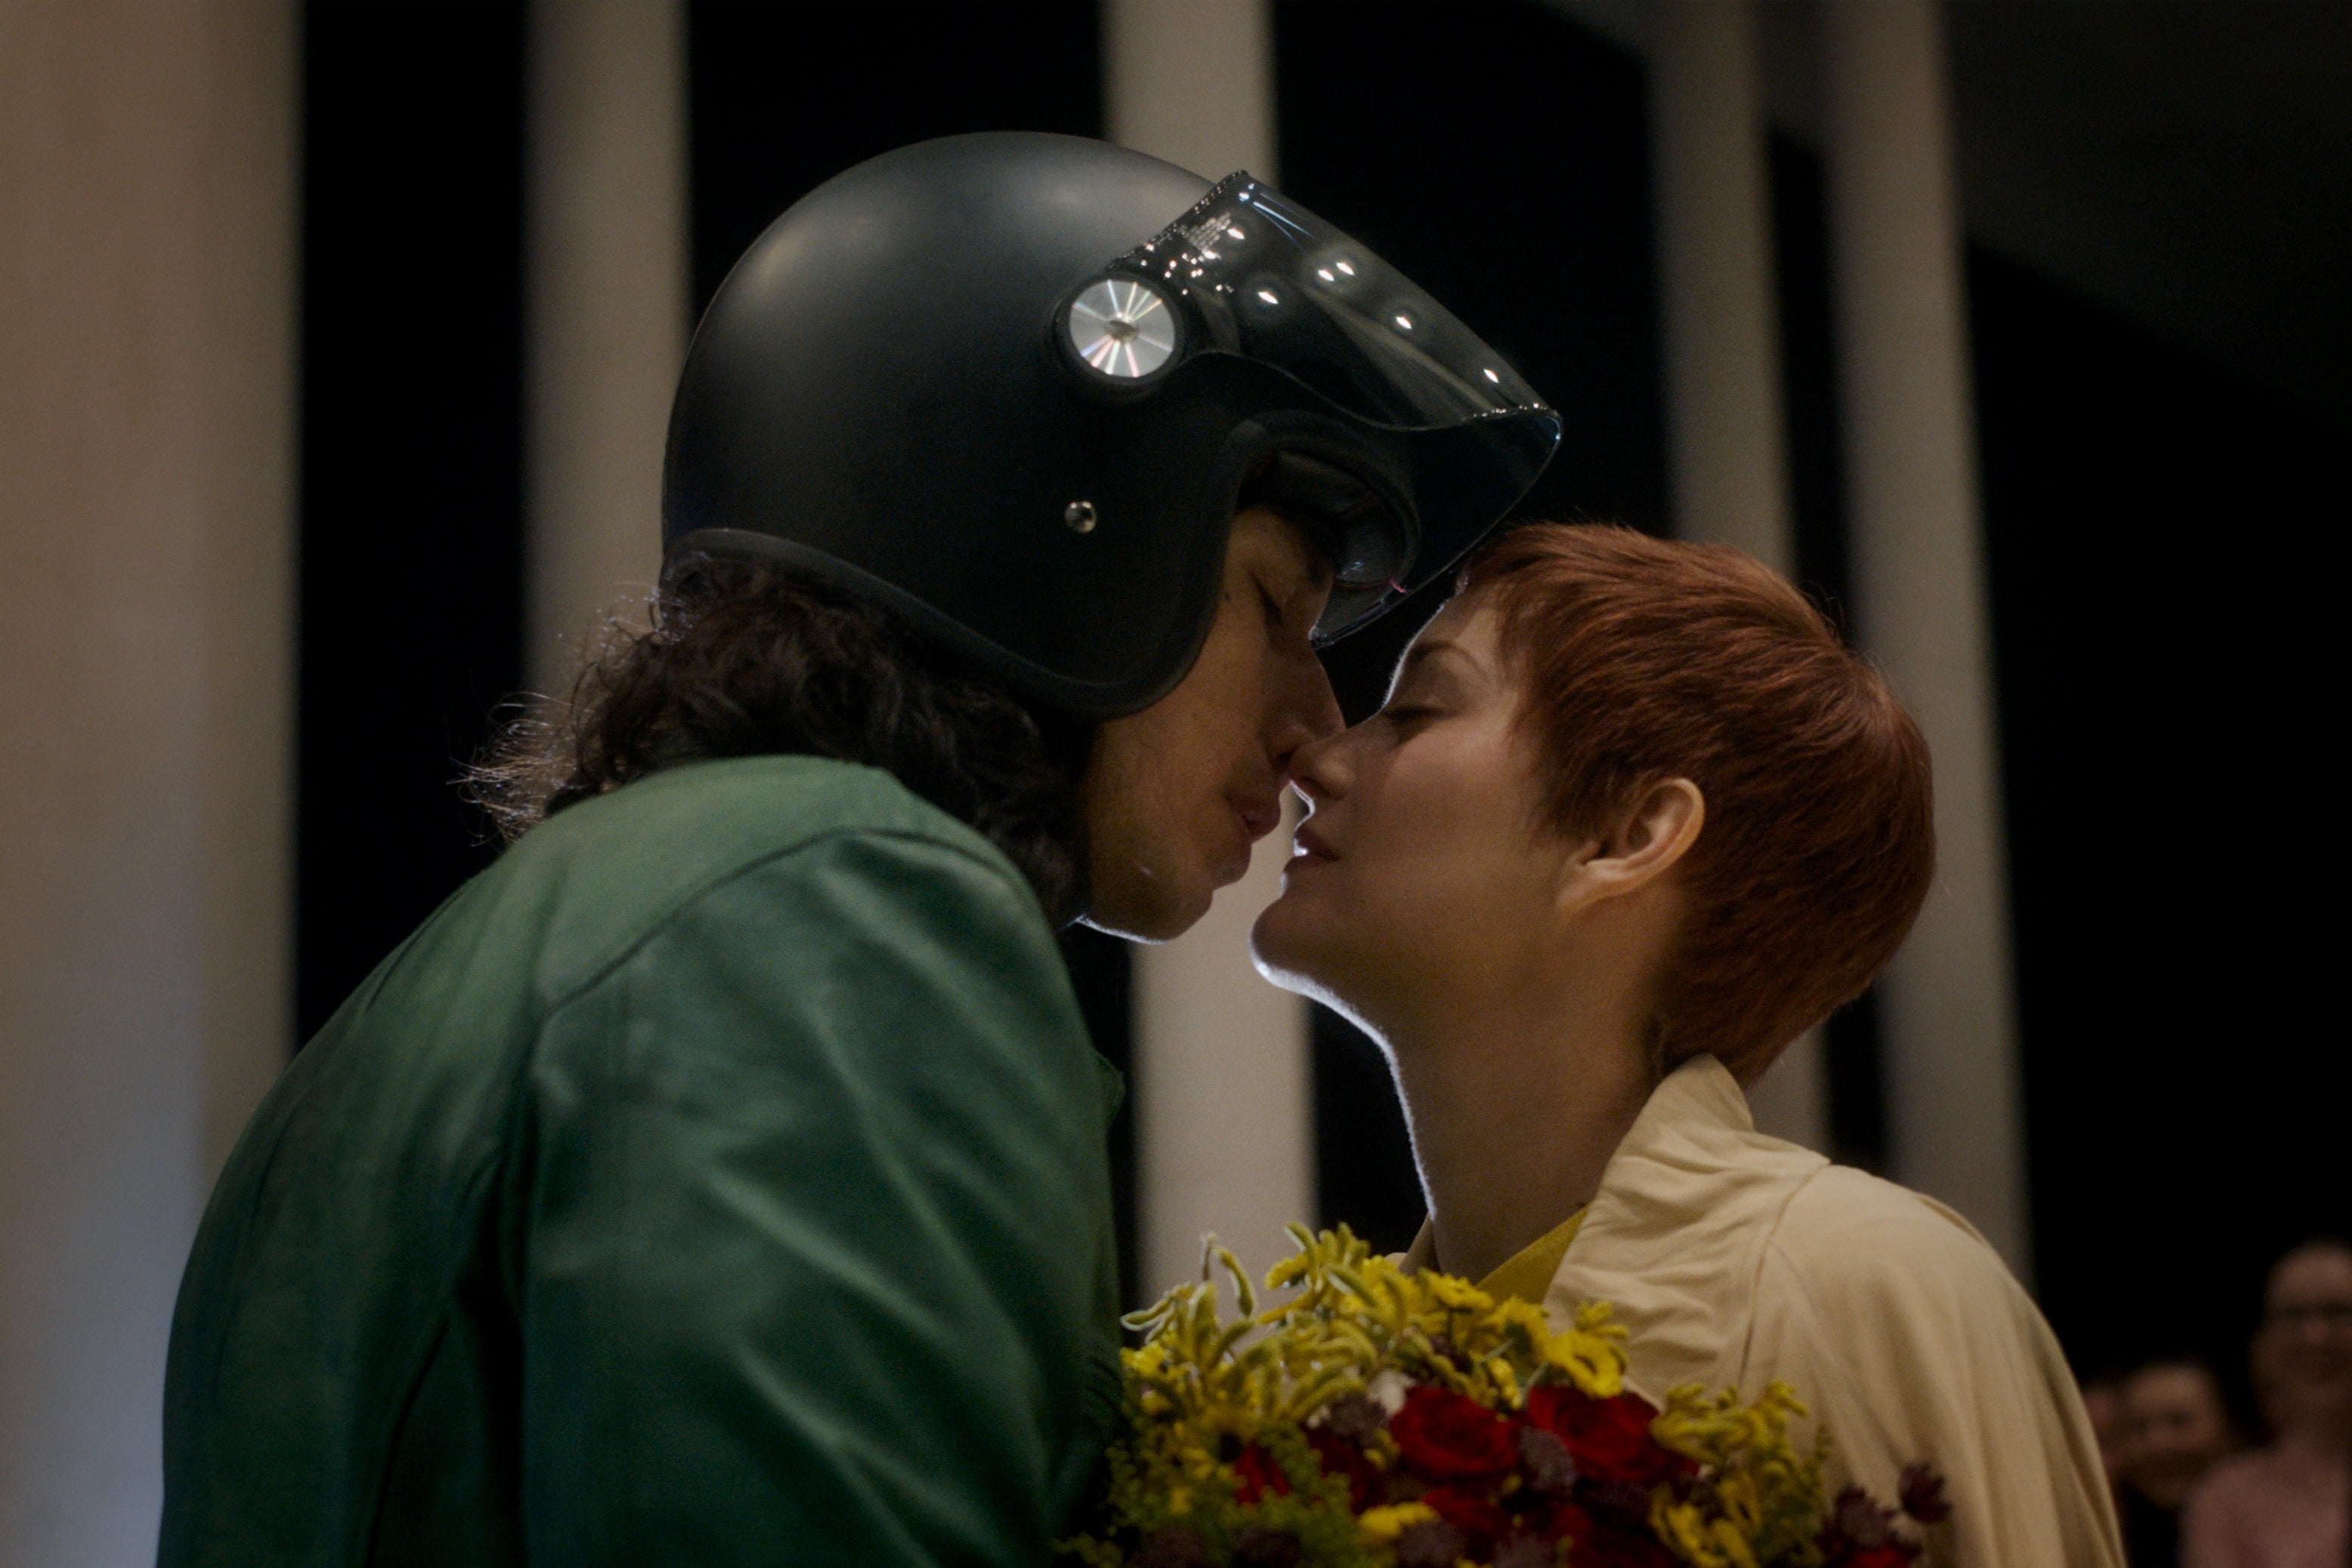 Adam Driver, wearing a motorcycle helmet, leans in to kiss Marion Cotillard in a still from Leos Carax's film Annette.